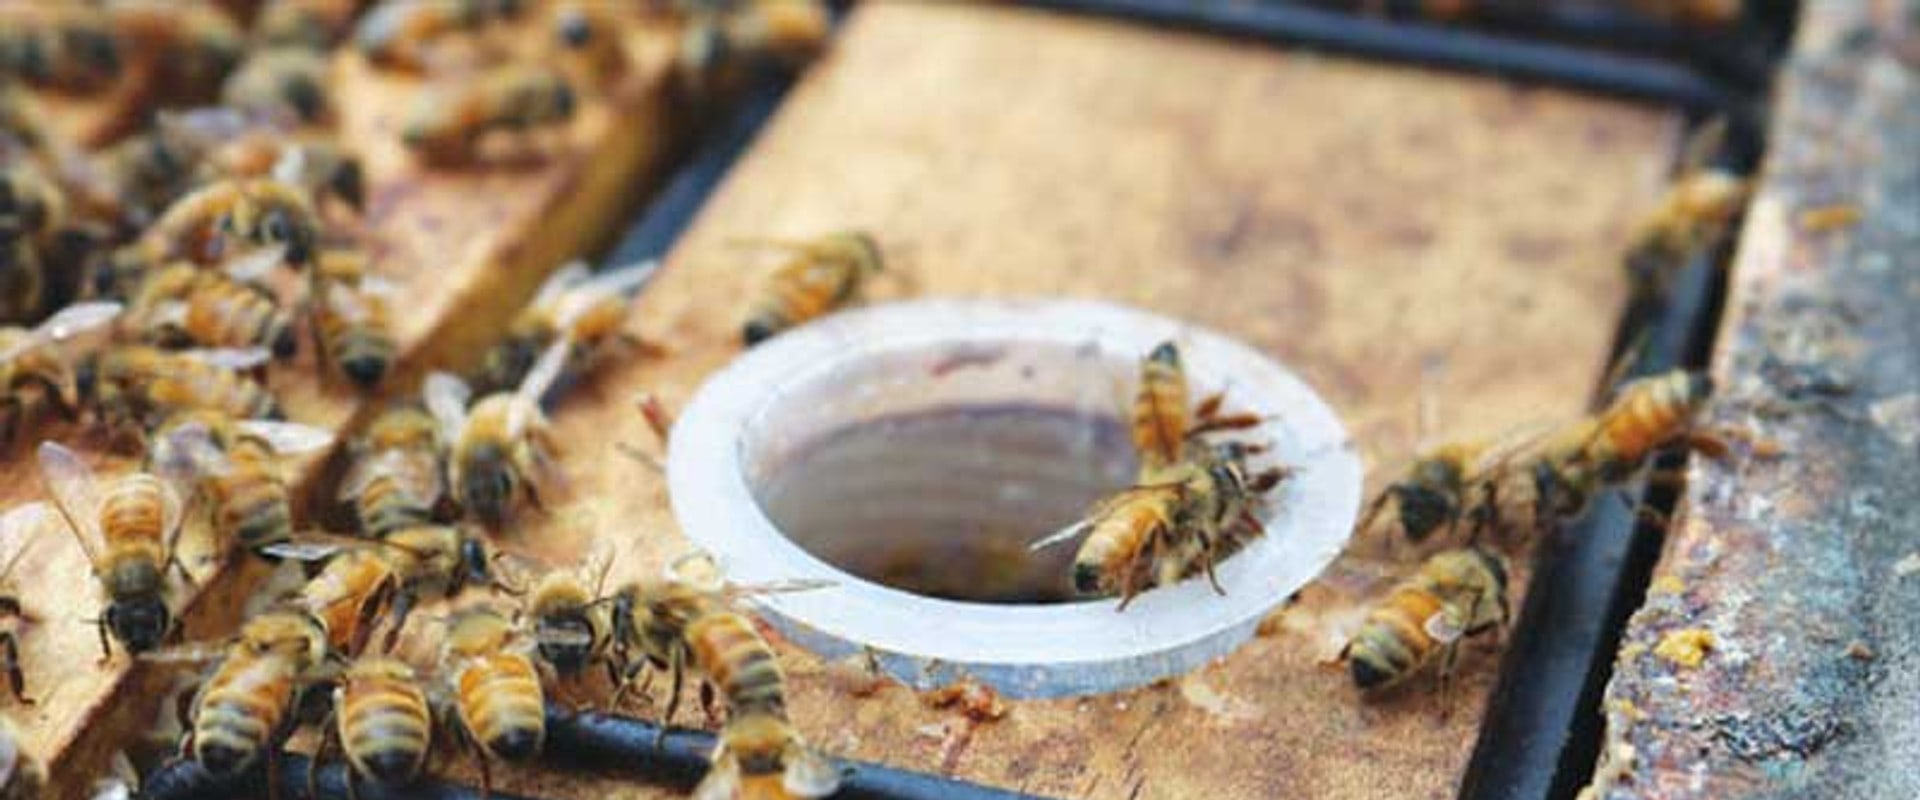 A Beginner's Guide to Feeding Bees